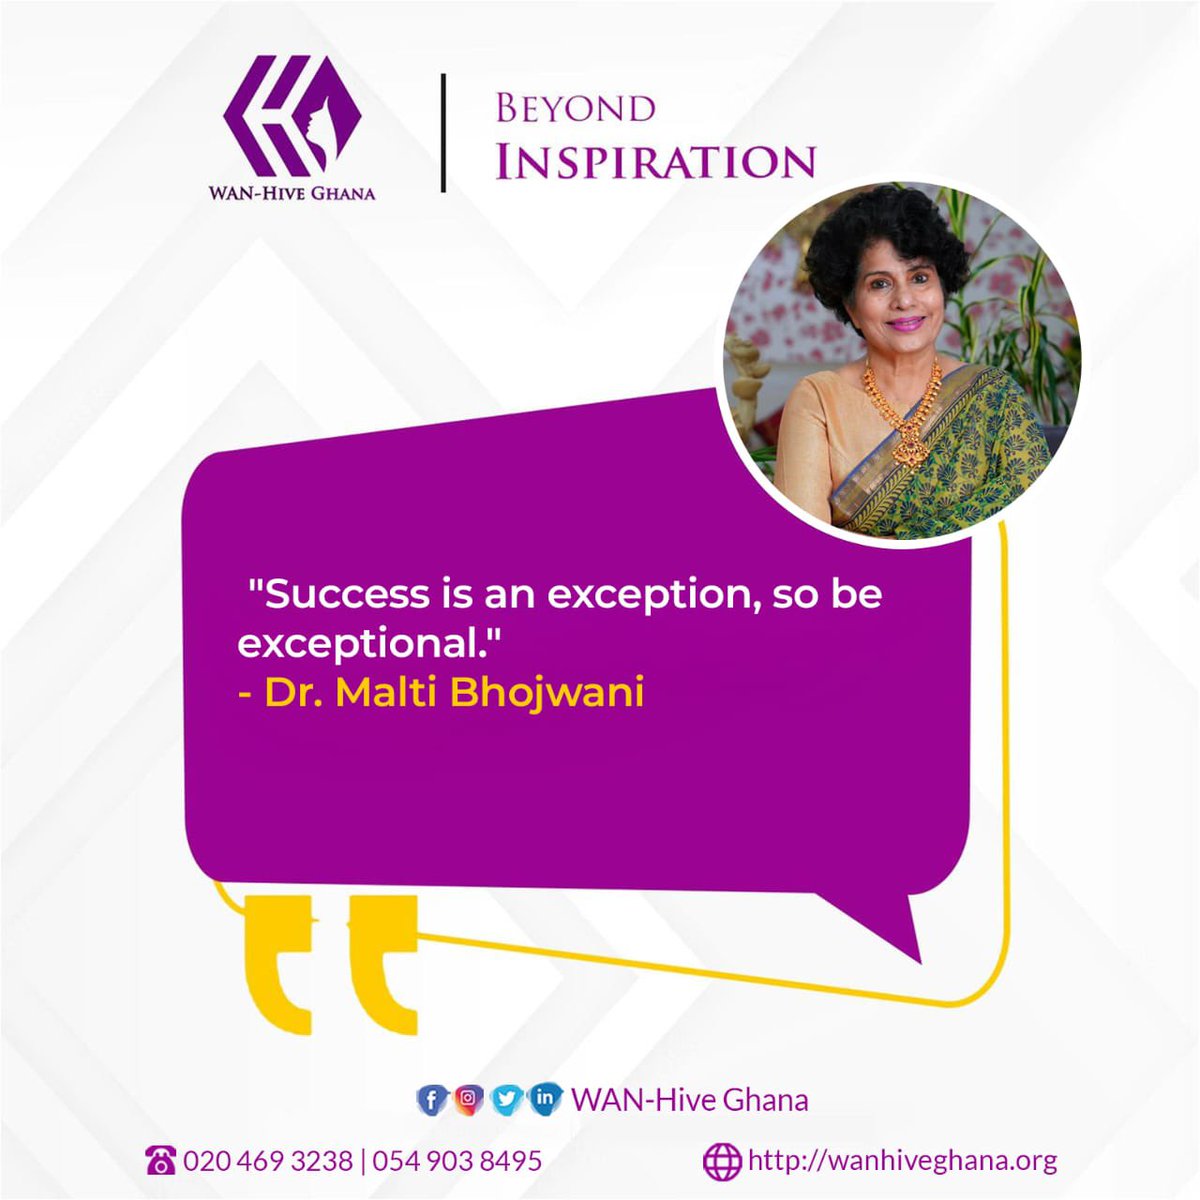 𝓑𝓮𝔂𝓸𝓷𝓭 𝓘𝓷𝓼𝓹𝓲𝓻𝓪𝓽𝓲𝓸𝓷

”Success is an exception, so be exceptional” ~ Dr. Malti Bhojwani

Have a productive week👍🏾

#Beyondinspiration #WANHiveimpacts #mondaymotivation #womenlead